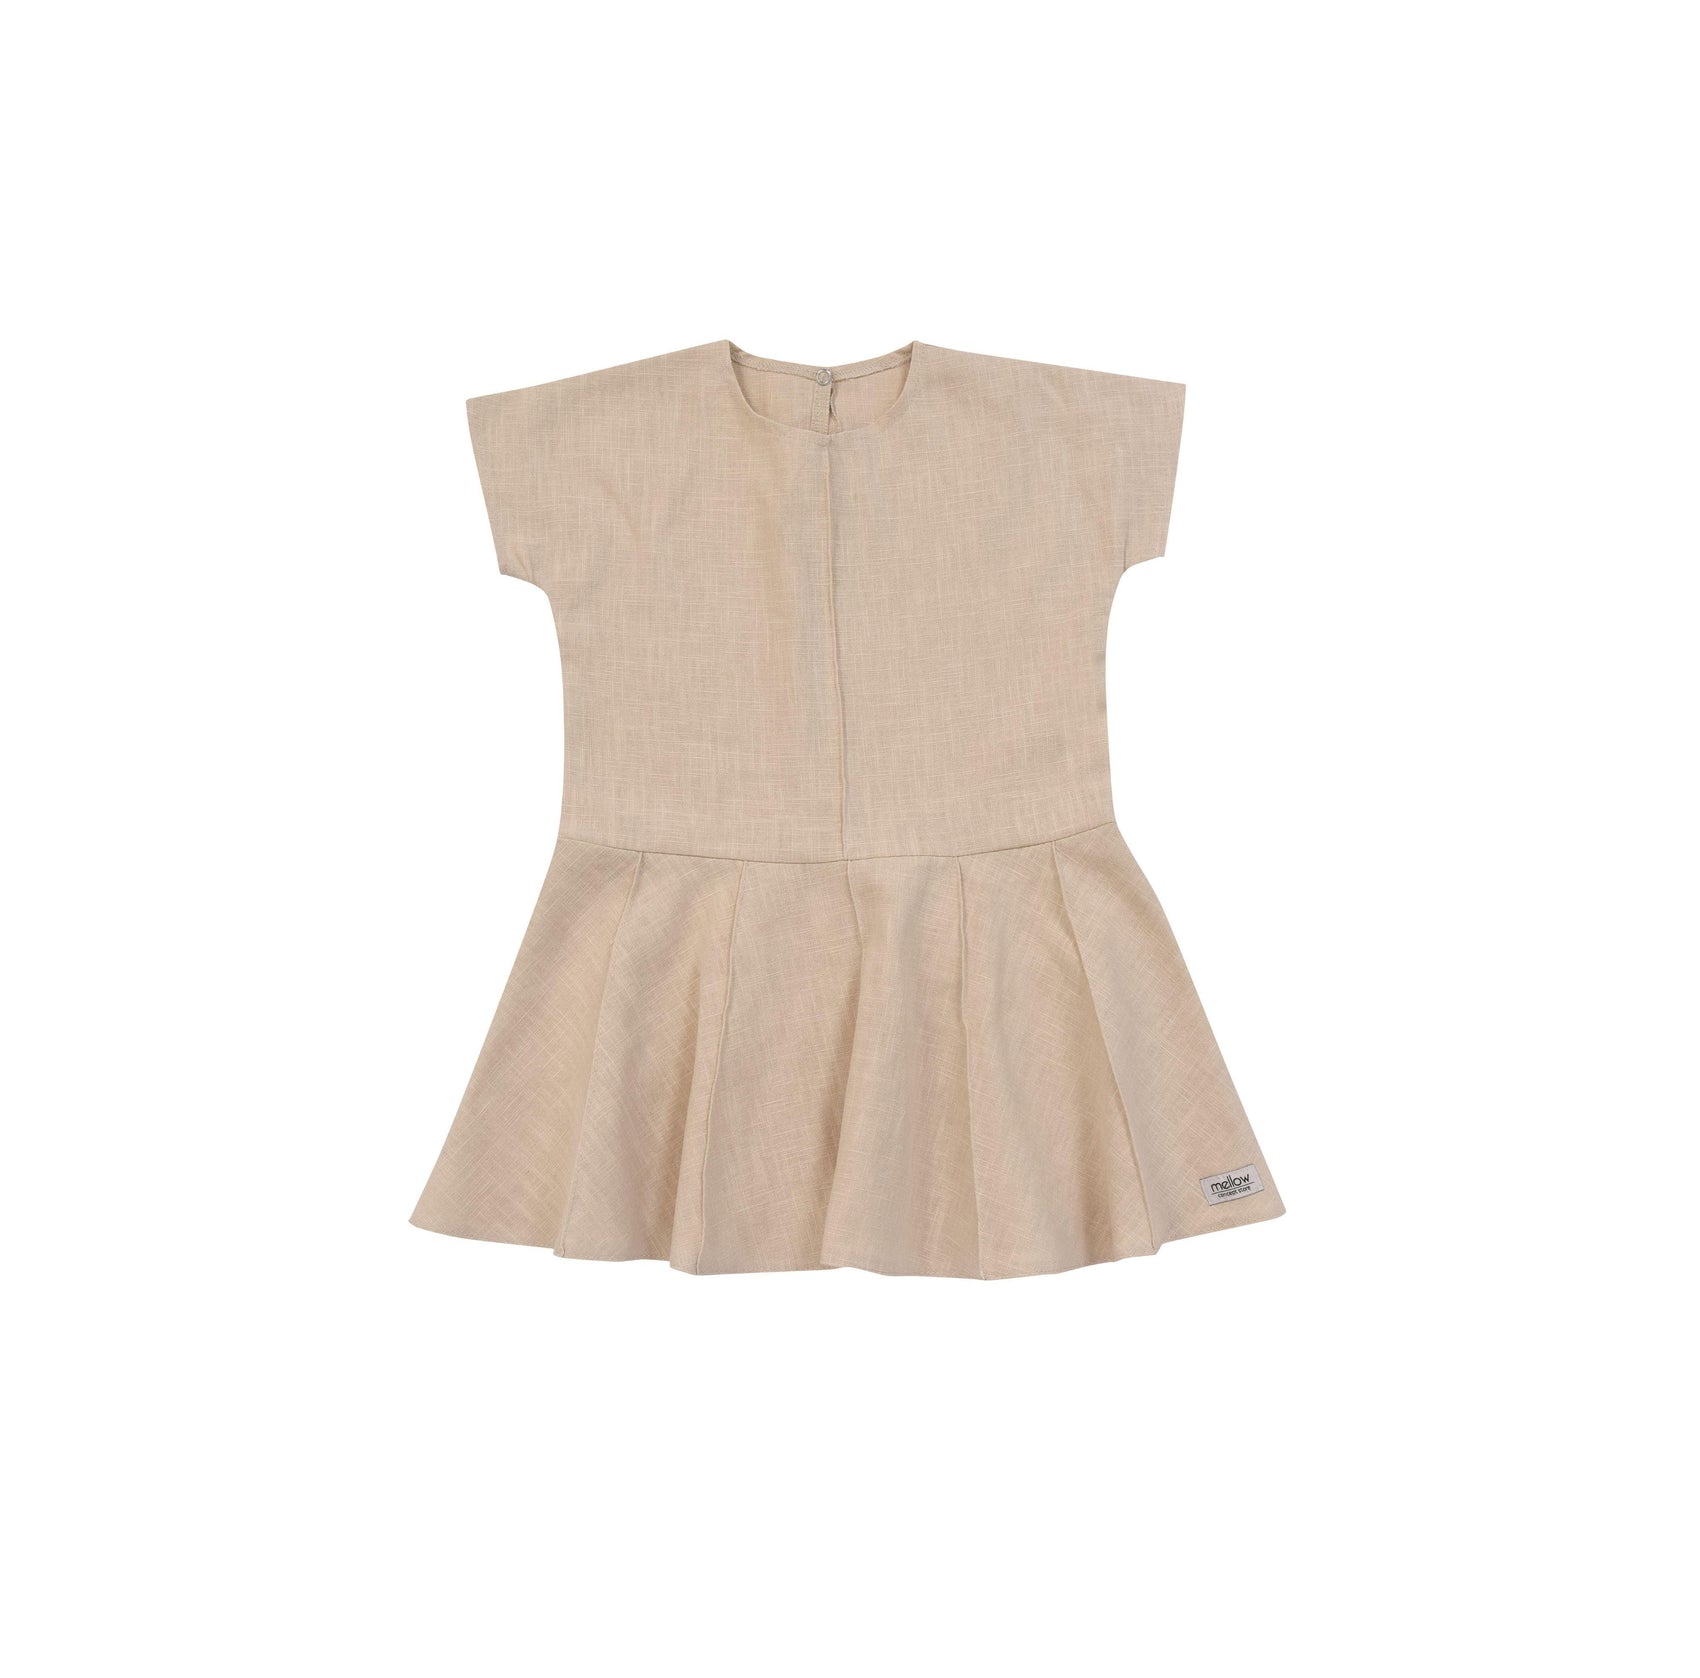 Sentence with product name and brand name inserted: A Ramie Baby/Kid Dress in Beige from Mellow Concept Store, made of ramie fabric which is gentle on delicate skin.